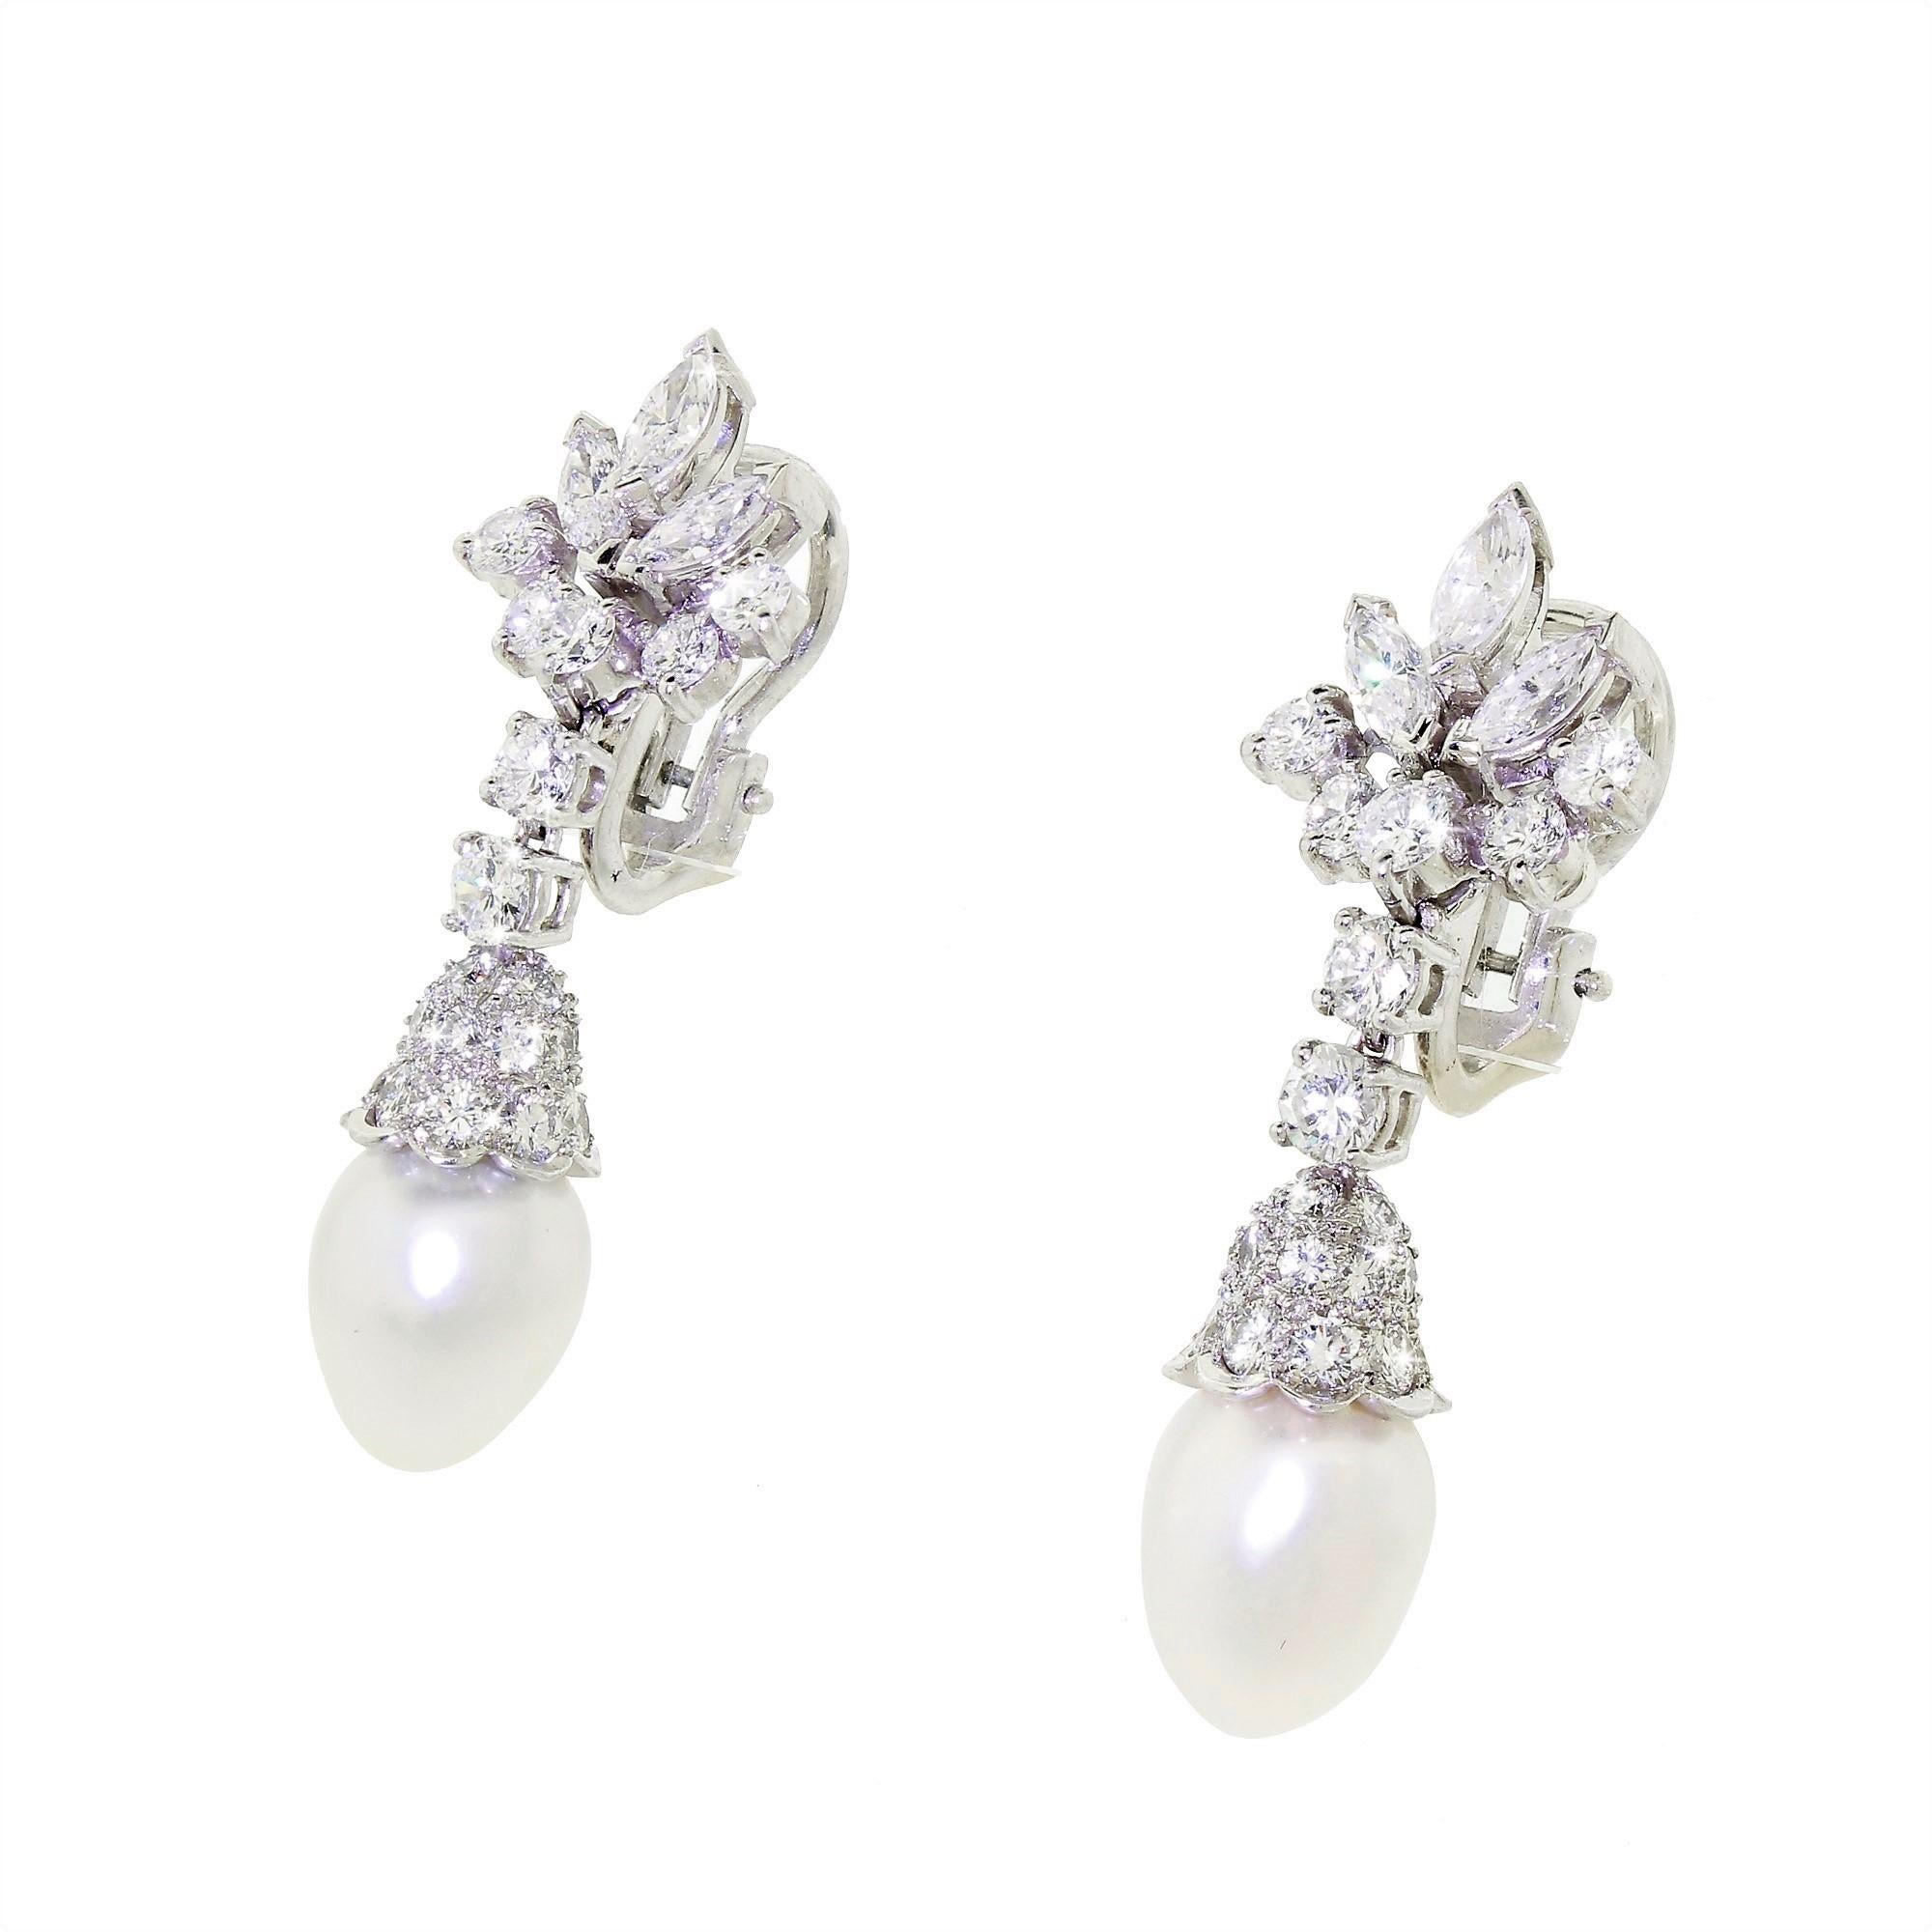 Details & Condition: This is an exquisite not to mention  high quality pair of diamond, pearl and platinum earrings.
They are truly an impressive pair that just oozes elegance.
The drop shaped South Sea pearls are beautifully matched in both size